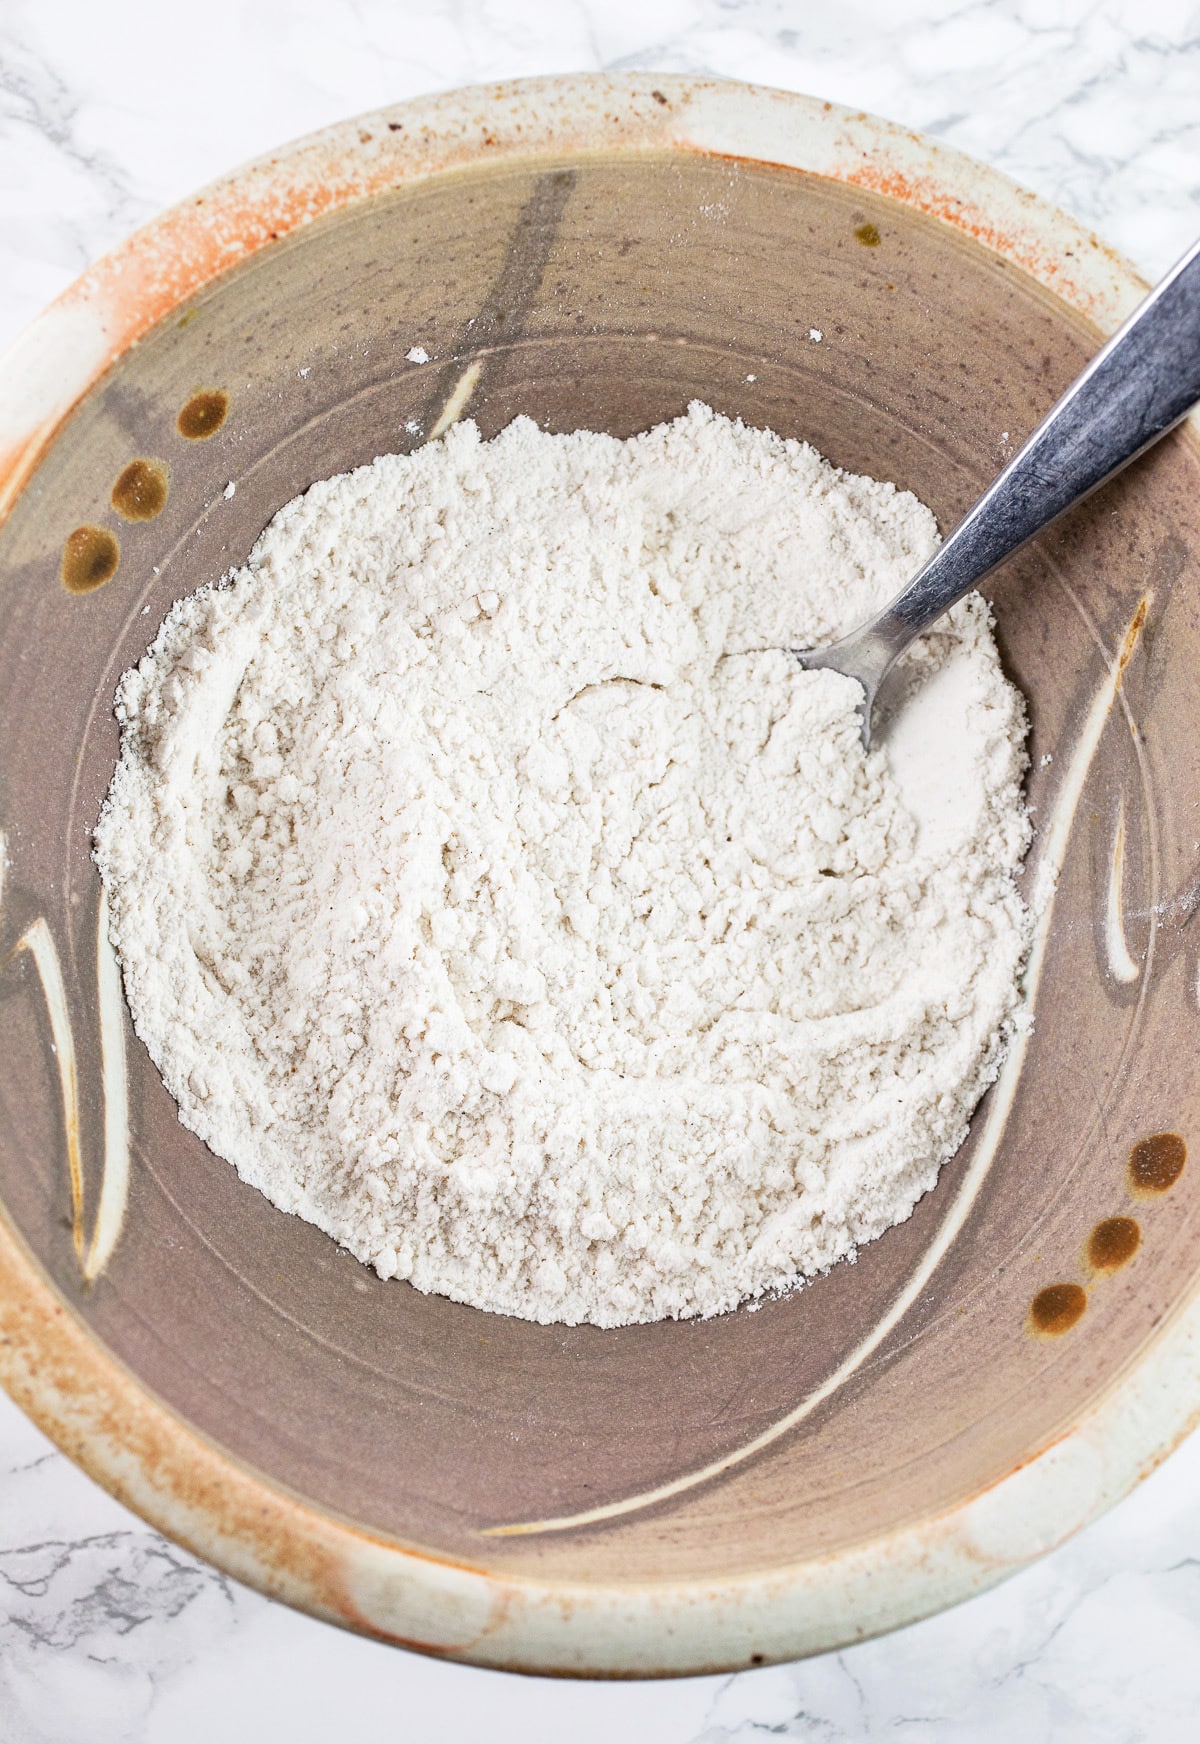 Dry ingredients in ceramic mixing bowl with fork.